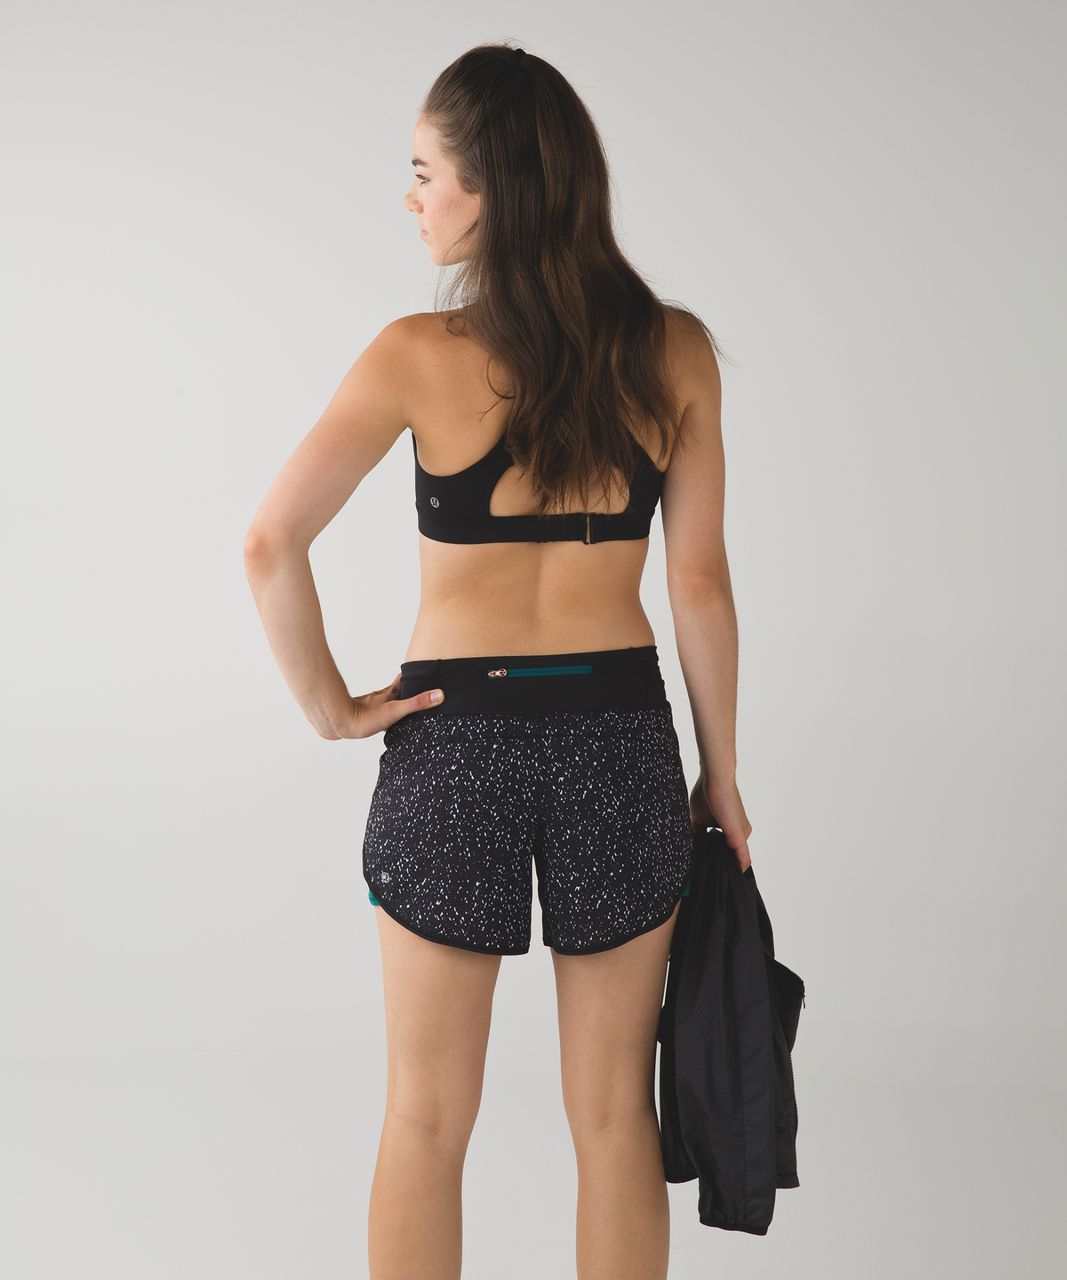 Lululemon Kanto Catch Me Short - Butterfly Texture Black White / Forage Teal